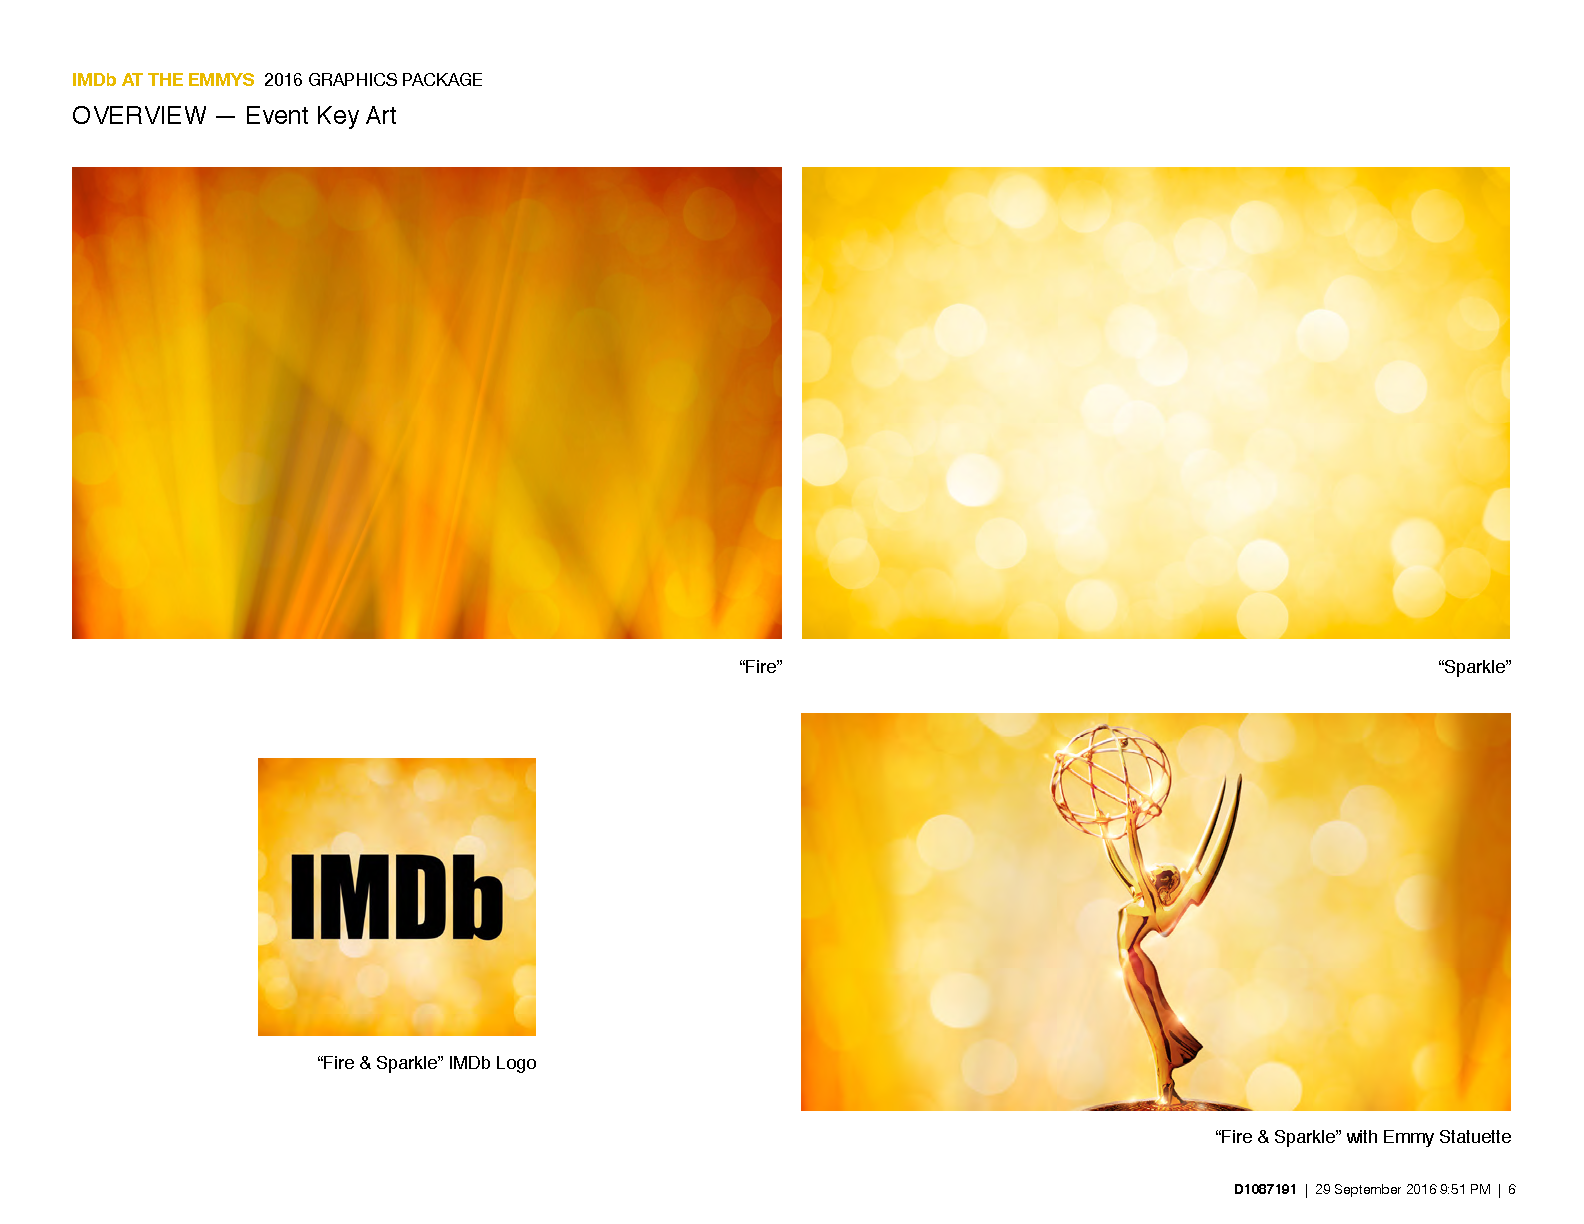 Emmys 2016 Graphic Package Key Art Backgrounds